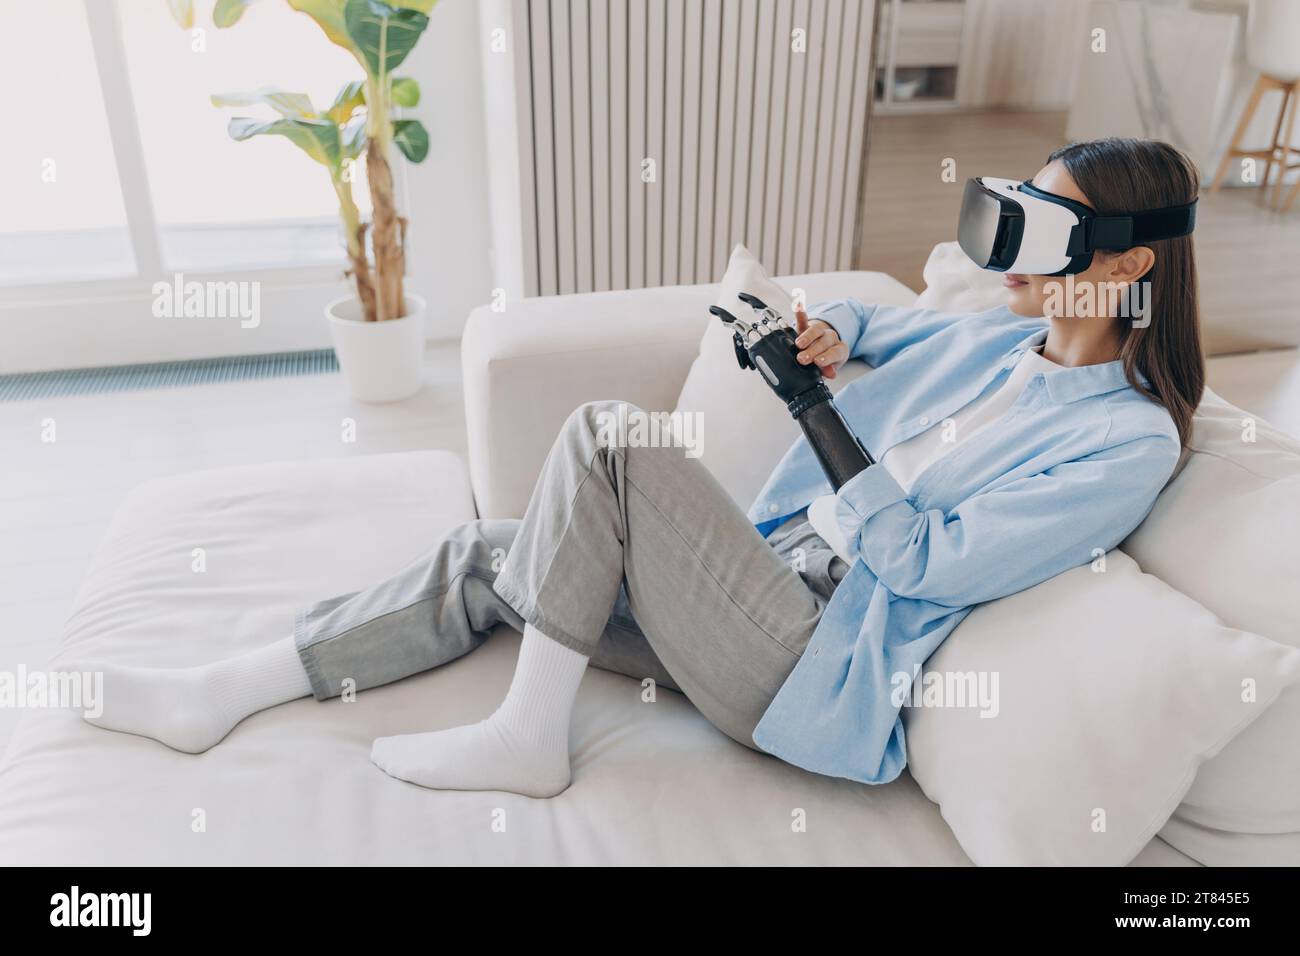 Relaxed young woman with a prosthetic arm enjoys a virtual reality experience, comfortably lounging at home Stock Photo